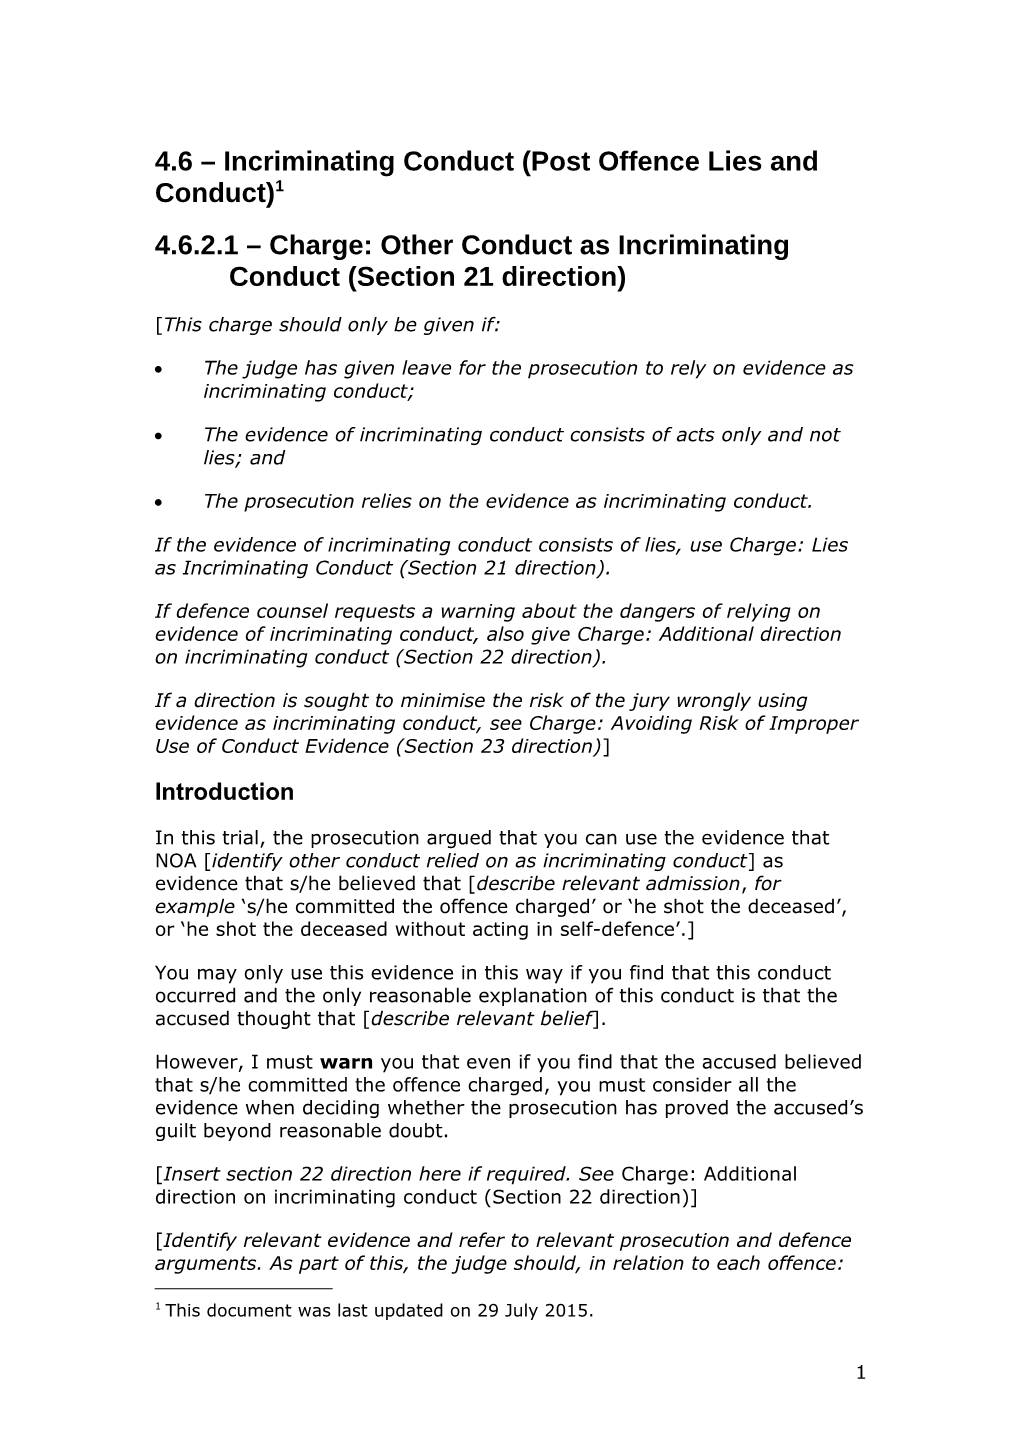 4.6 Incriminating Conduct (Post Offence Lies and Conduct) 1